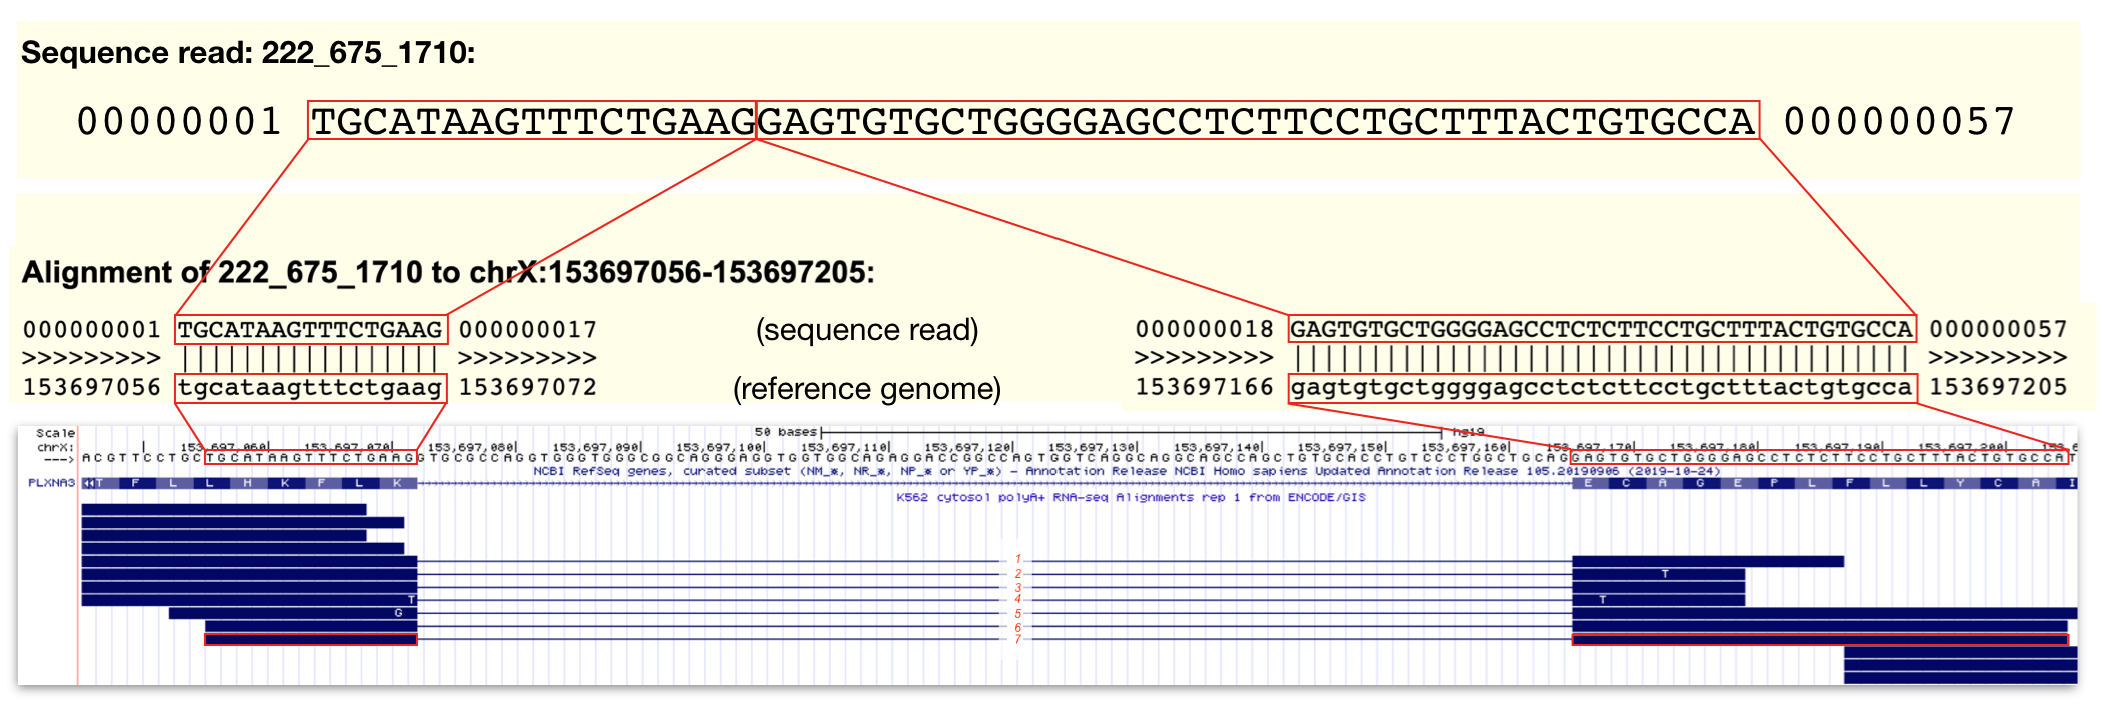 The top panel contains the sequence data for a single sequence read (read ID: 222_675_1710). The middle panel displays the alignment between this sequence read and the reference genome. Regions identical in sequence are boxed and connected by lines. Notice that the alignment is *split*. **This is because the sequence read does NOT align to one single contiguous stretch of genomic DNA**. The bottom panel is a display of all the sequence read alignments that map to a small region of PLXNA3 including 222_675_1710 outlined in red. In this region, I count 7 split alignments that span intron 24 of PLXNA3. Click image to enlarge.